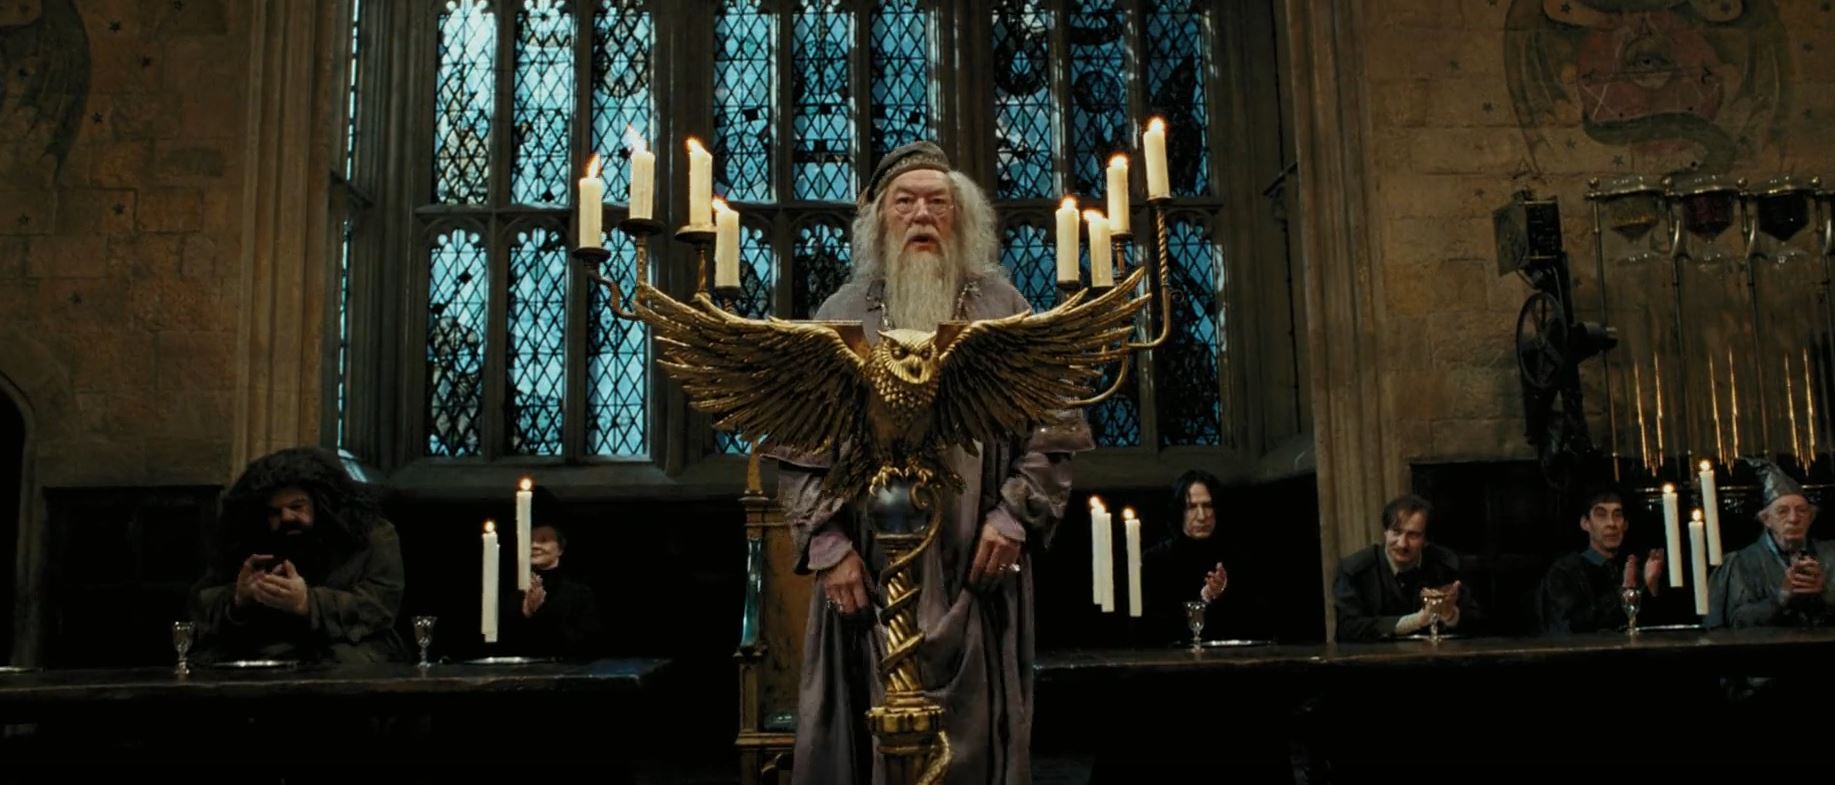 of myth, fantasy and the death of albus dumbledore